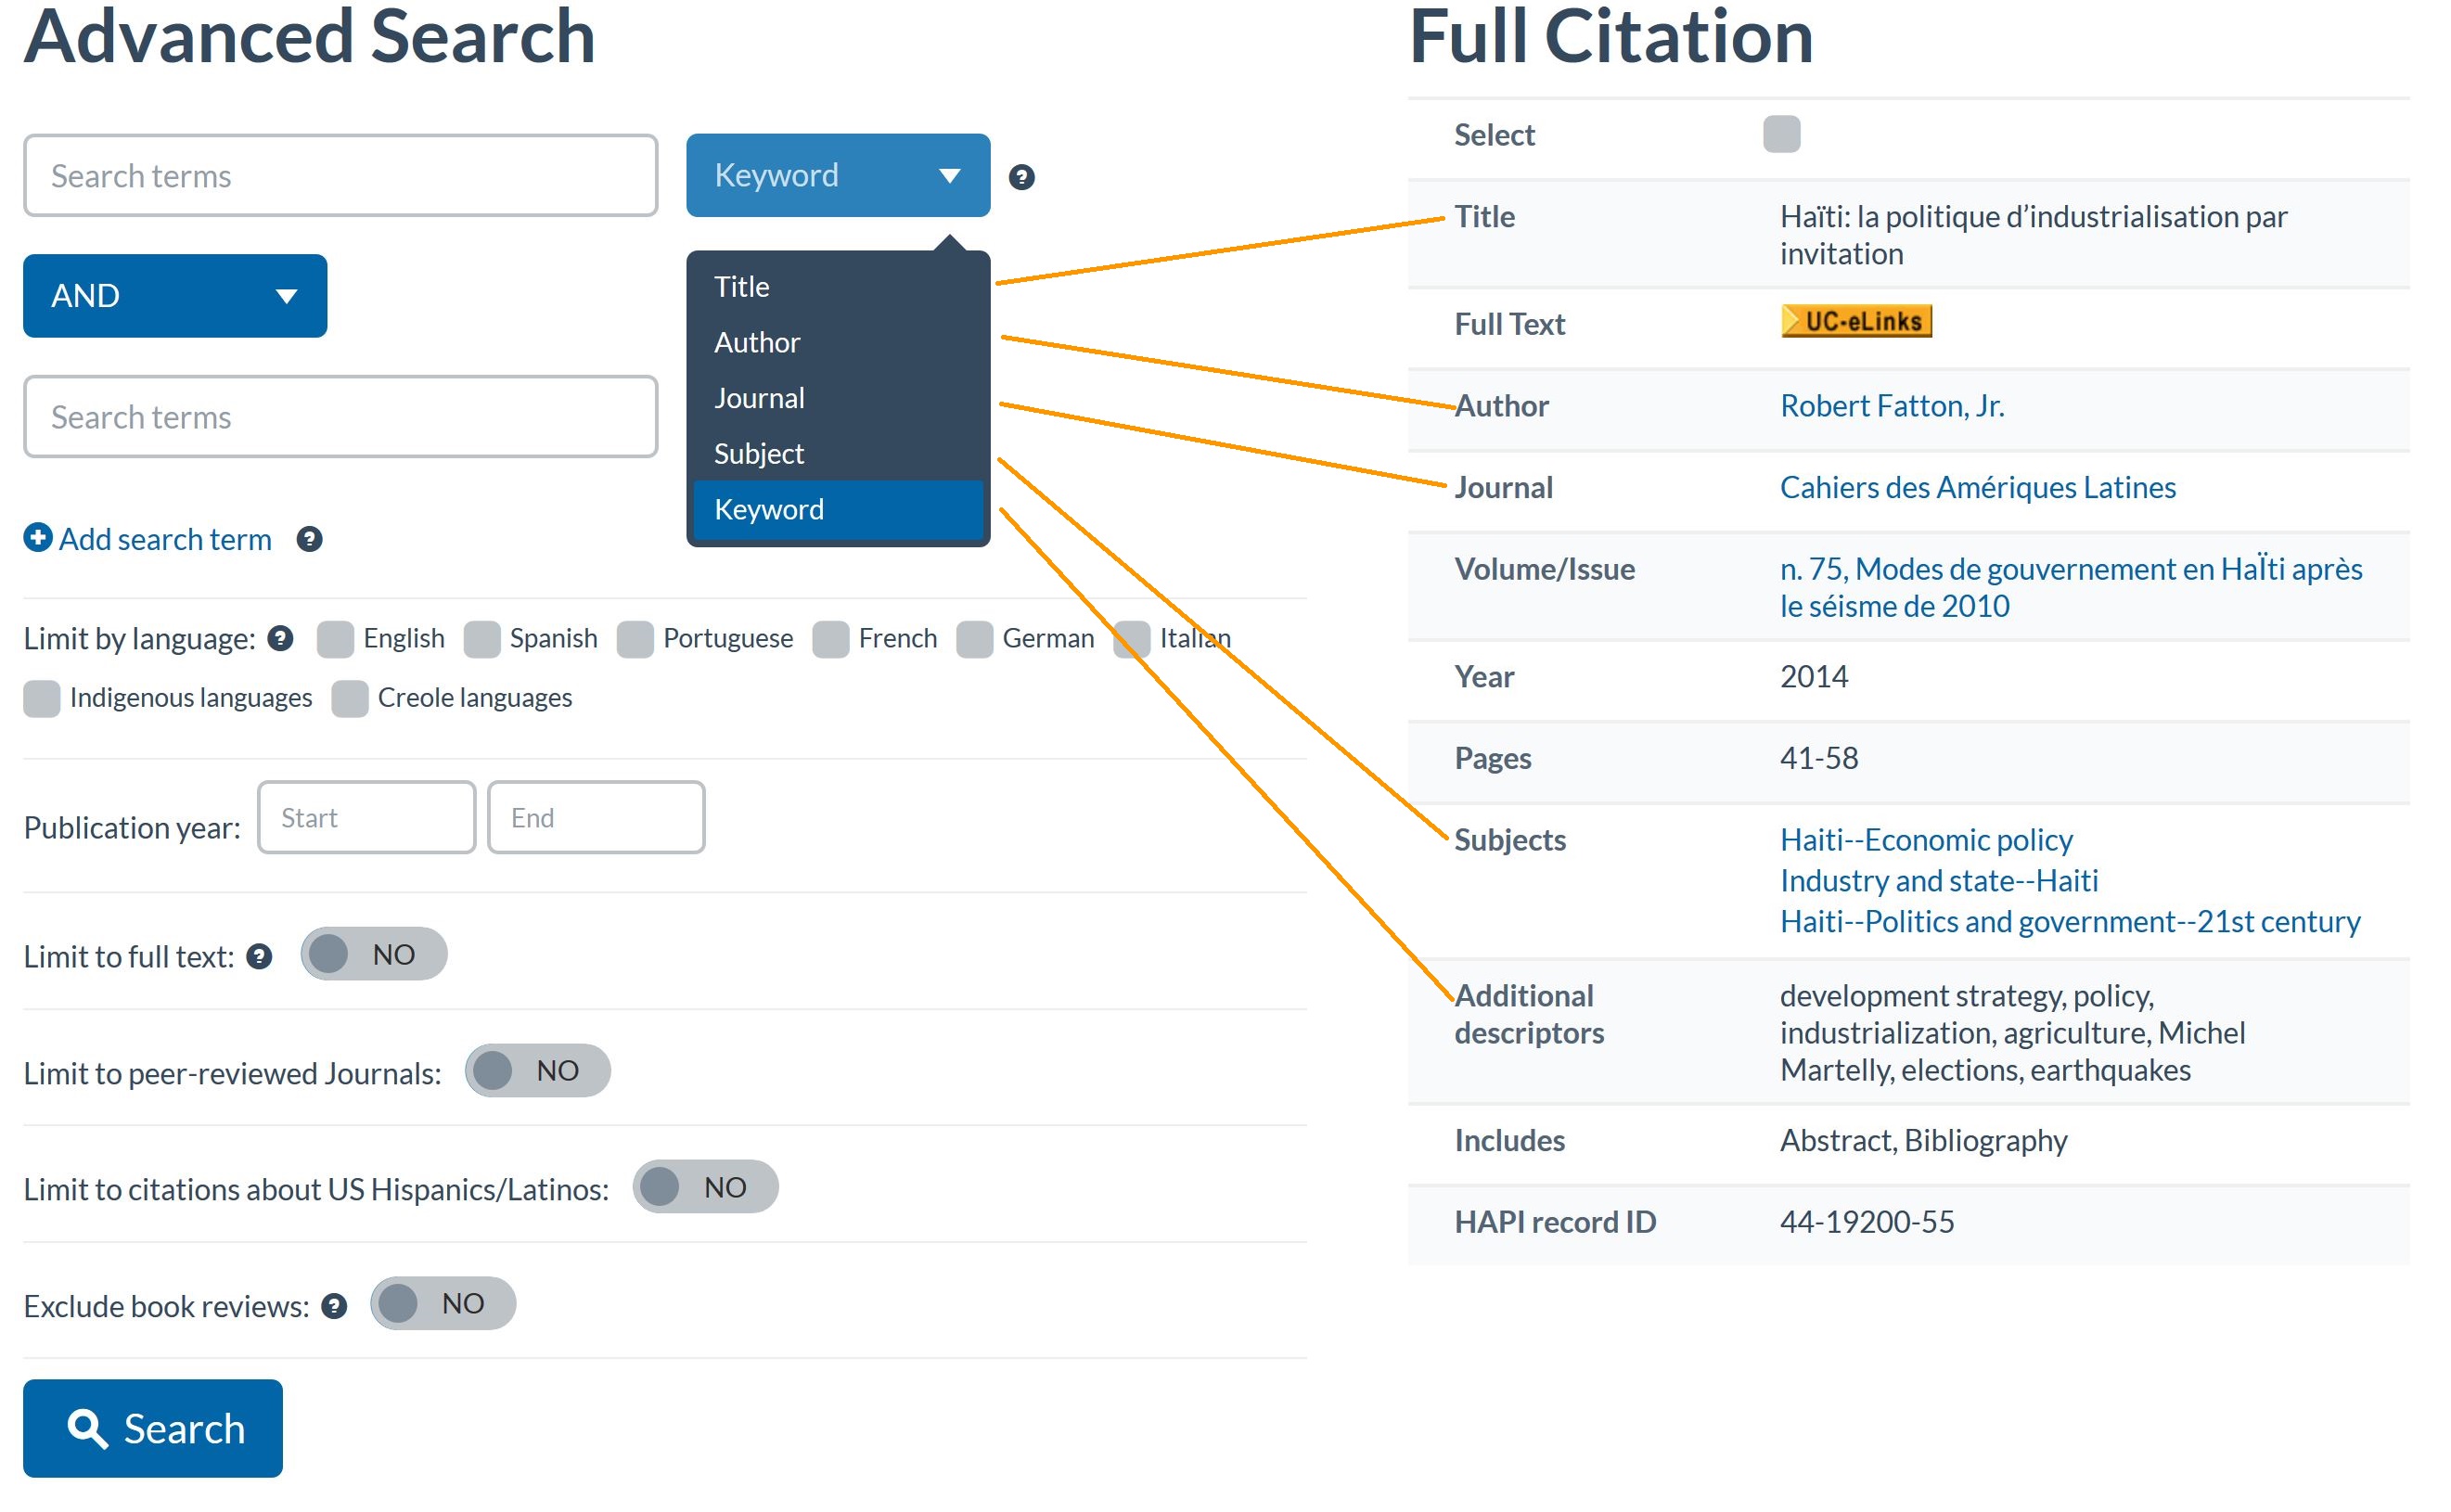 Advanced search fields and their corresponding location in article records